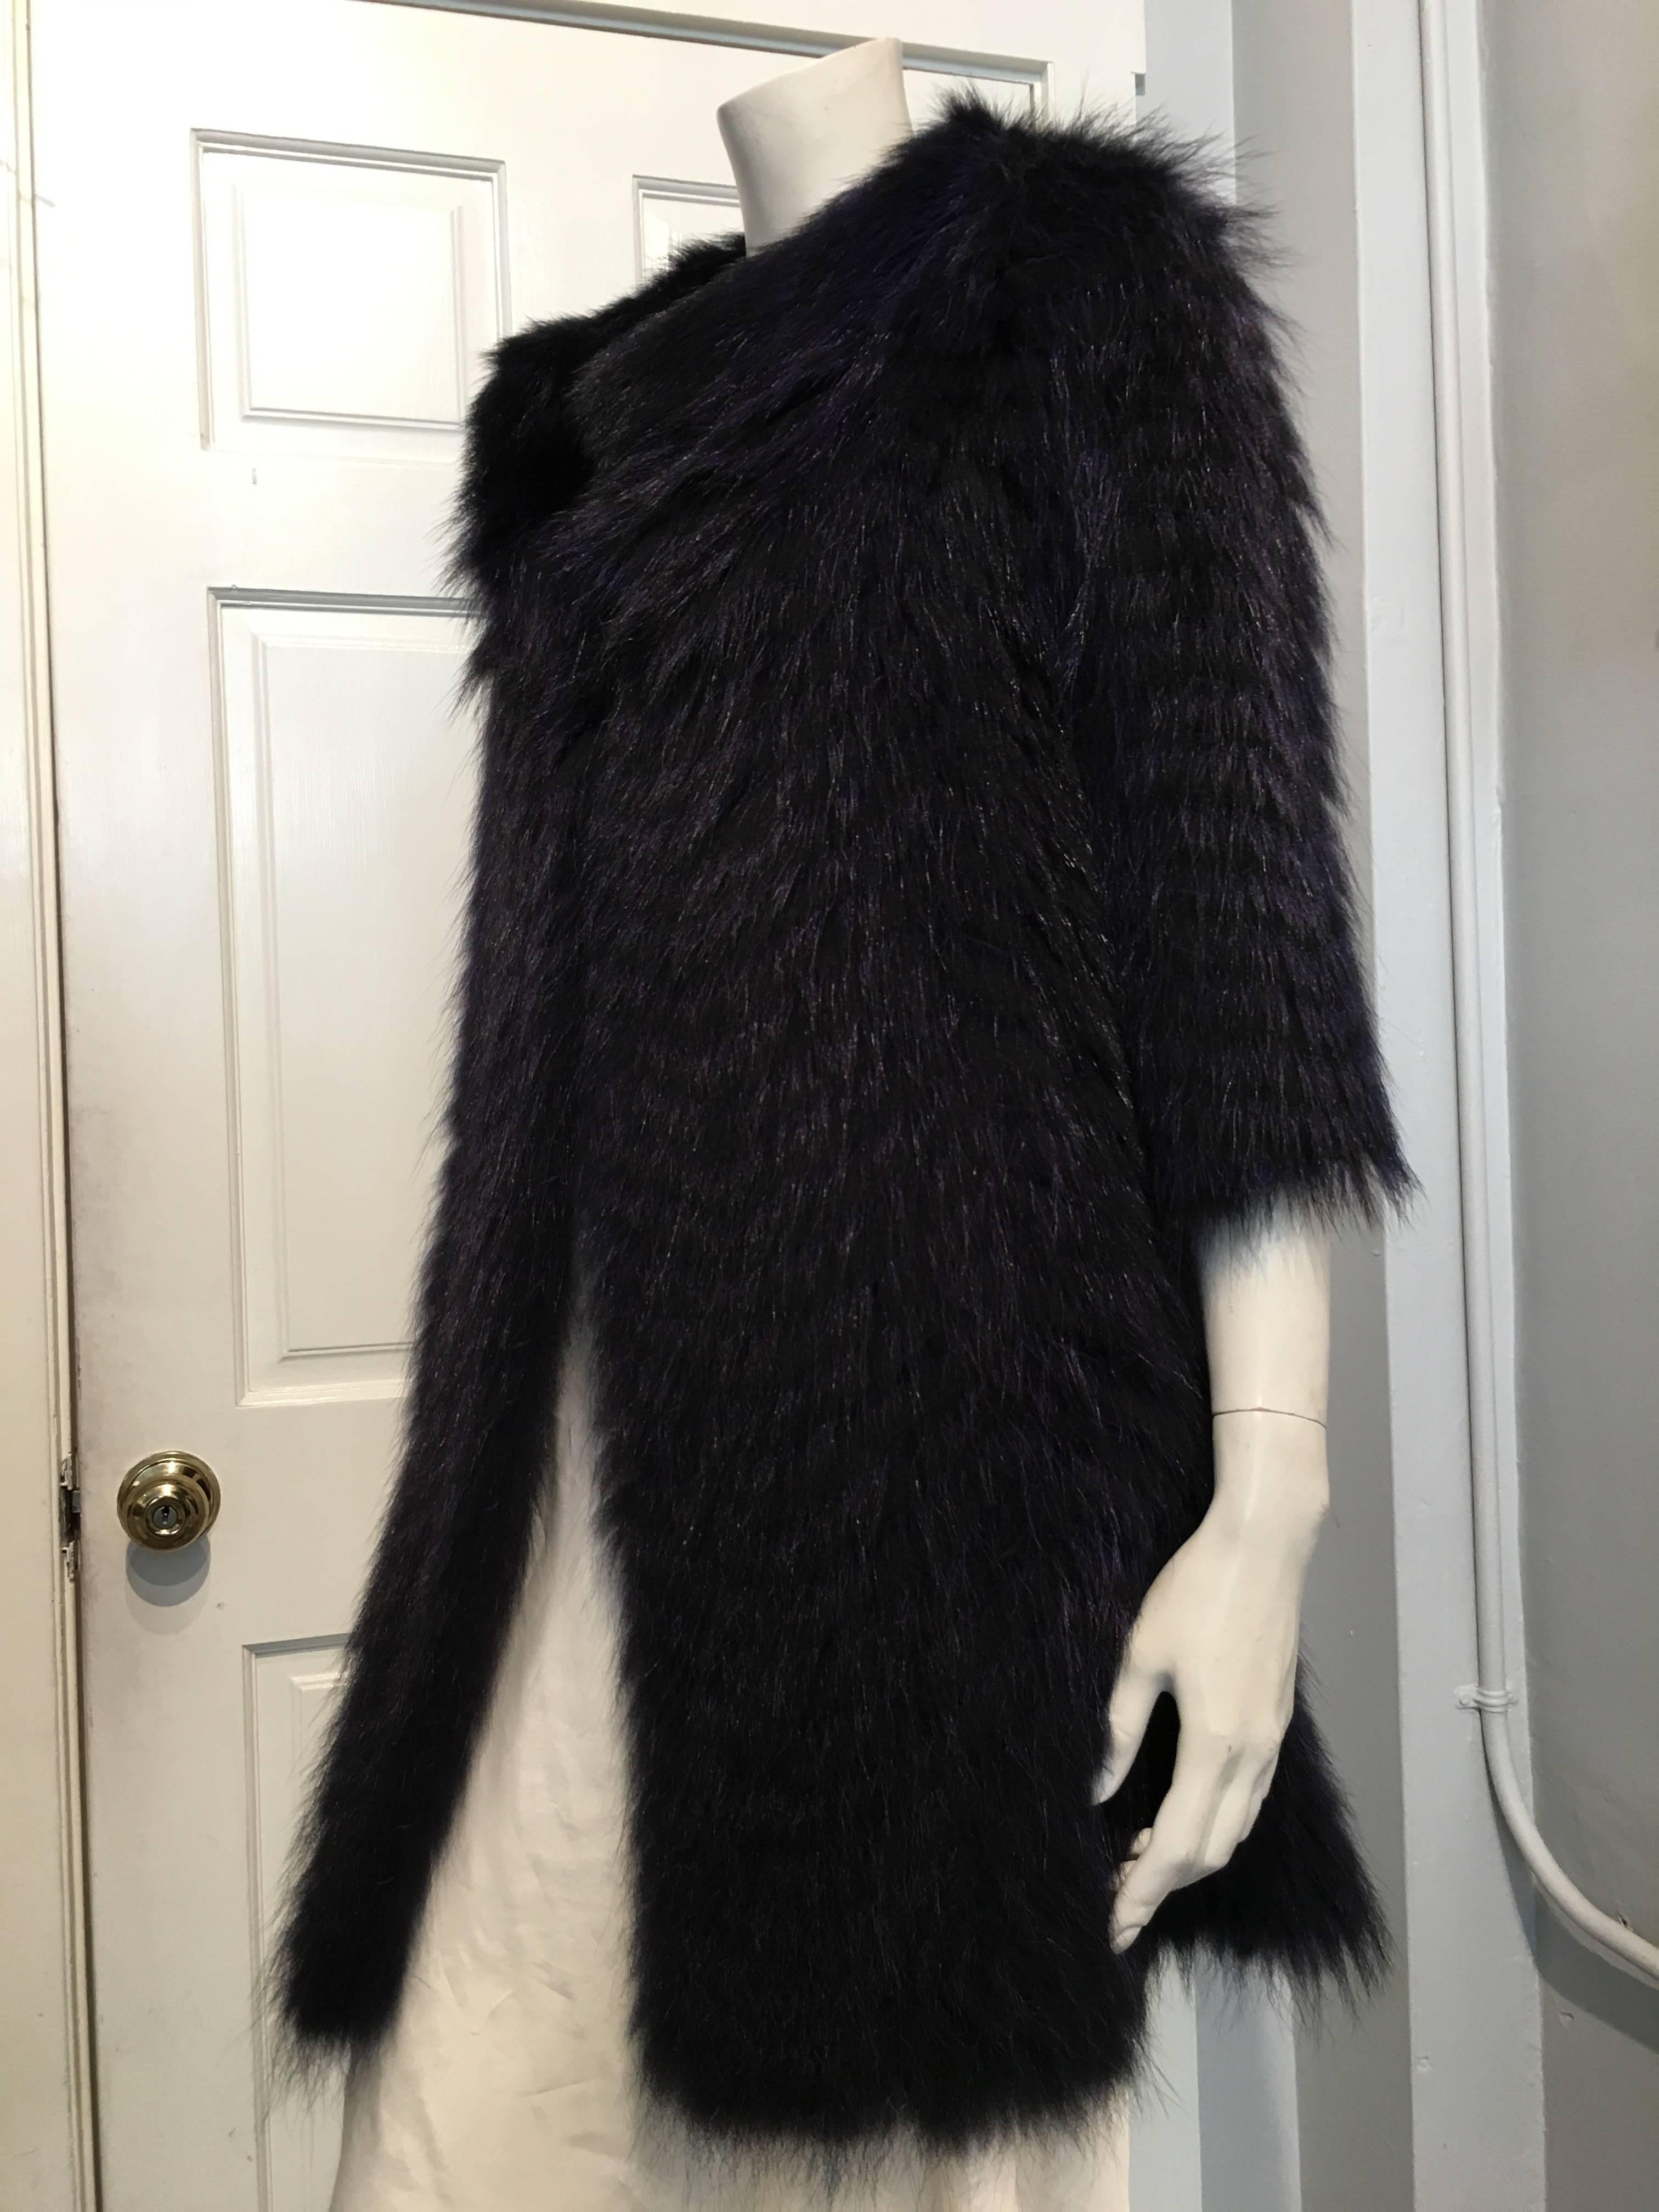 Cassin purple and black fur coat made with raccoon pelts sewn in a chevron pattern on black polyester backing.